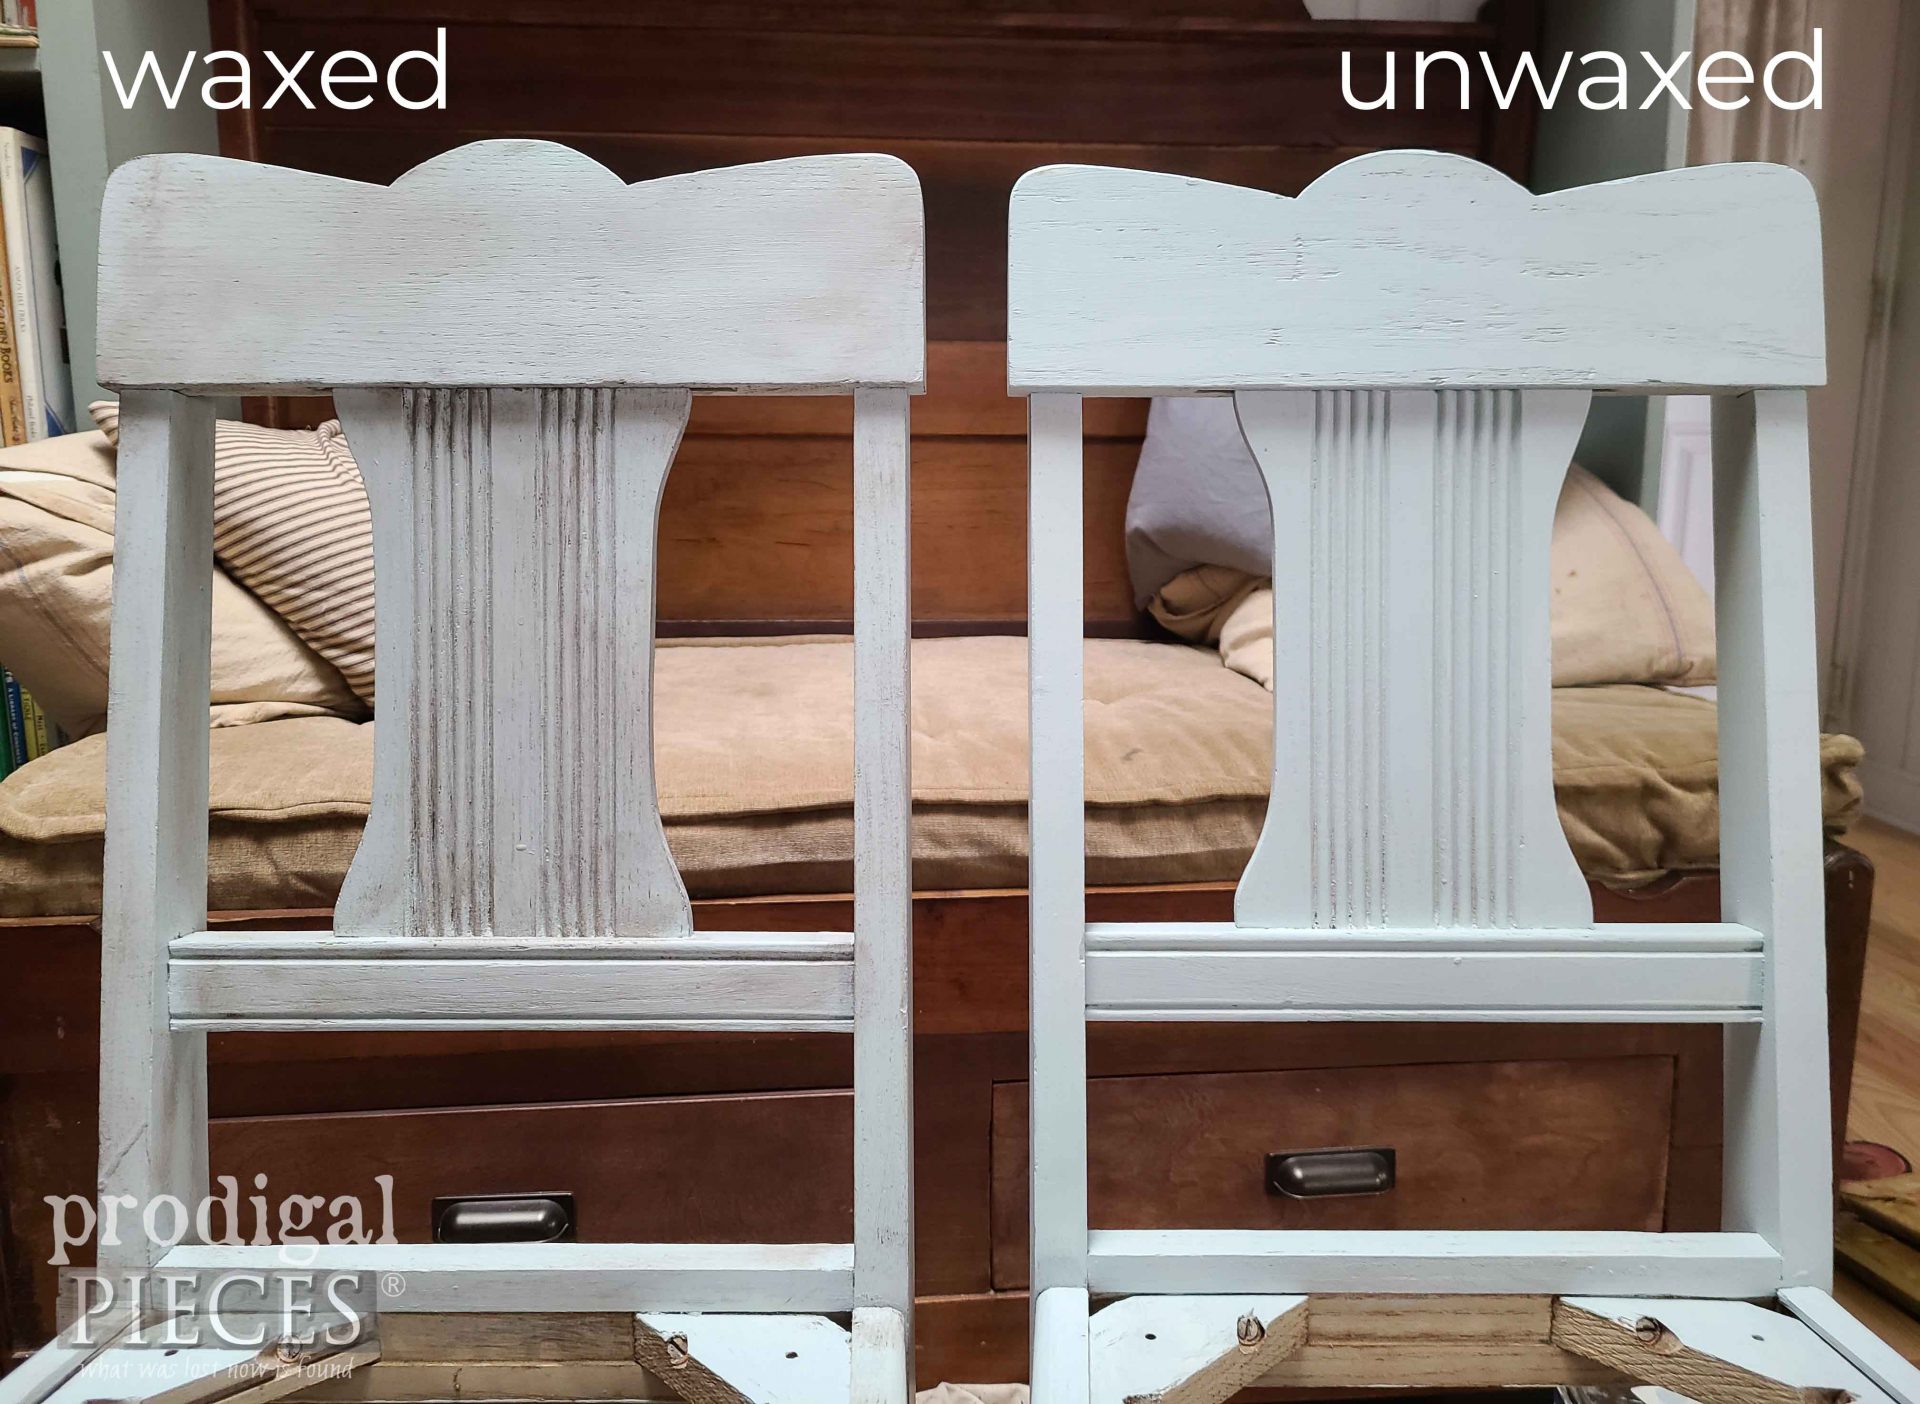 Waxed vs Unwaxed Chairs | prodigalpieces.com